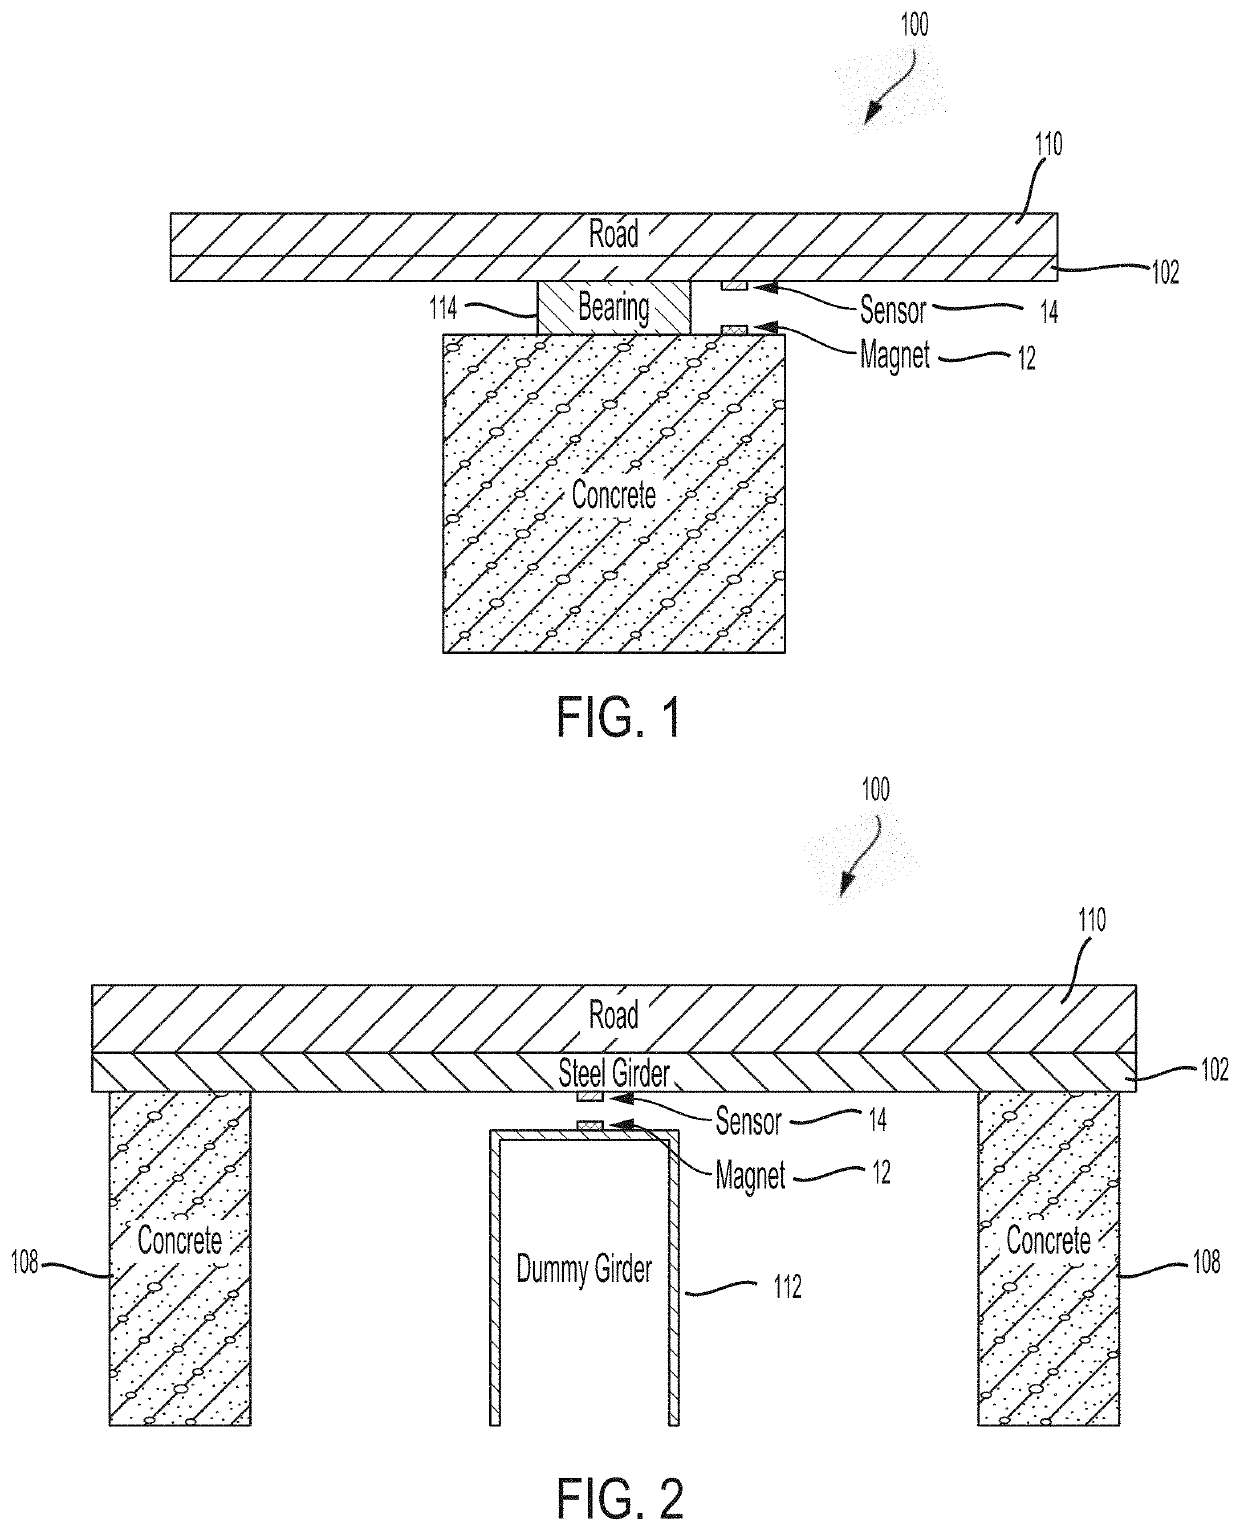 Systems and methods for measuring structural element deflections